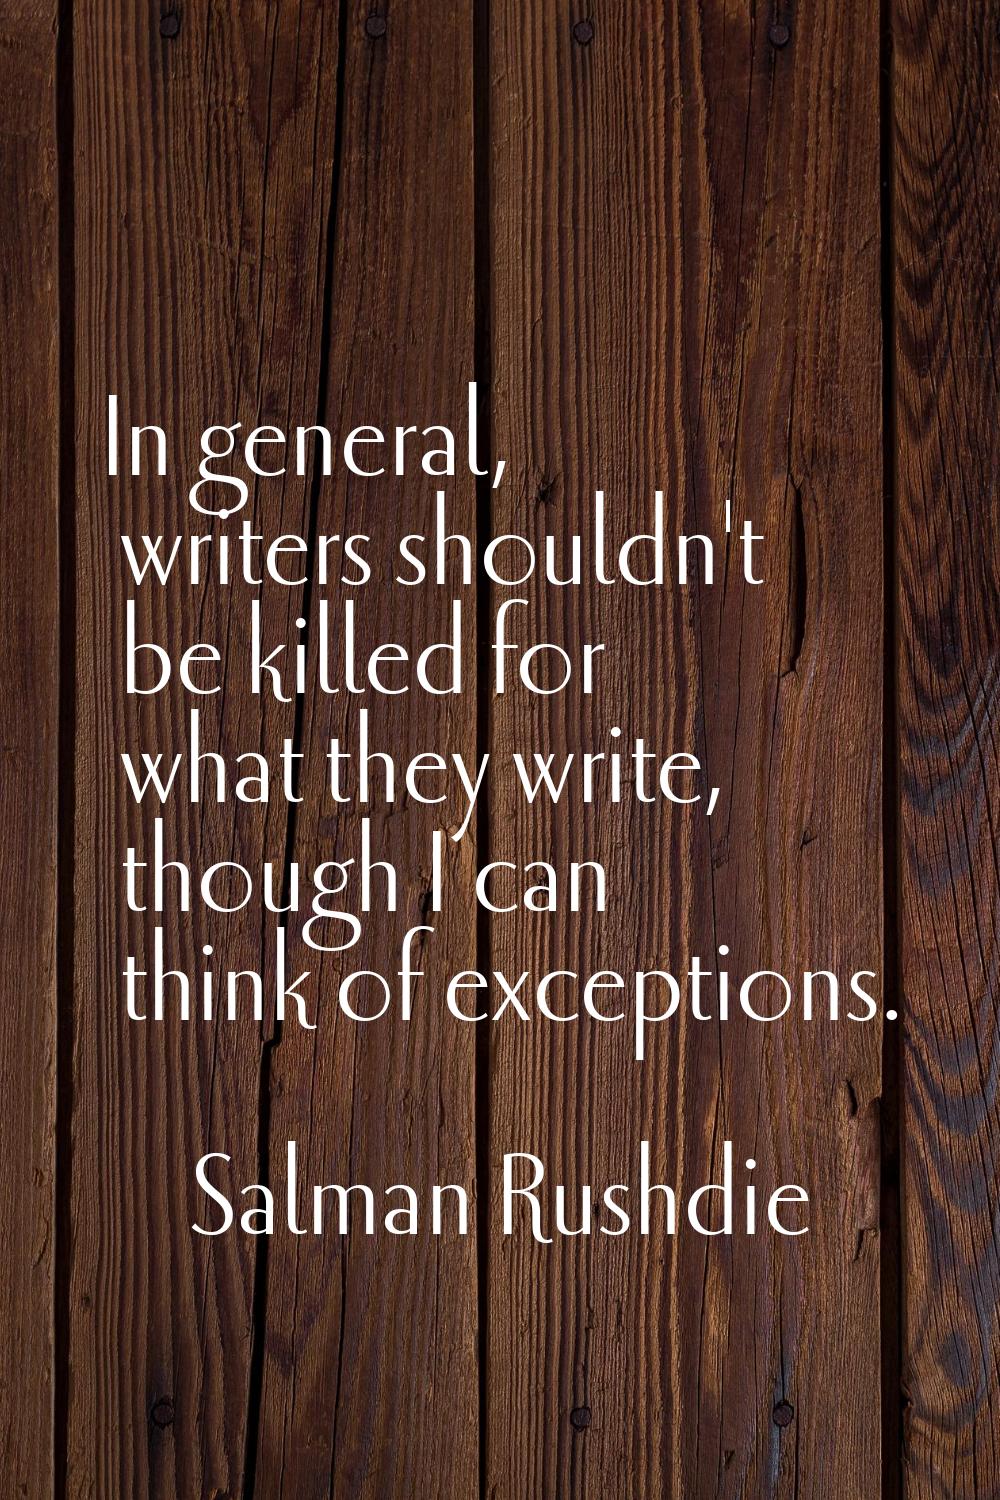 In general, writers shouldn't be killed for what they write, though I can think of exceptions.